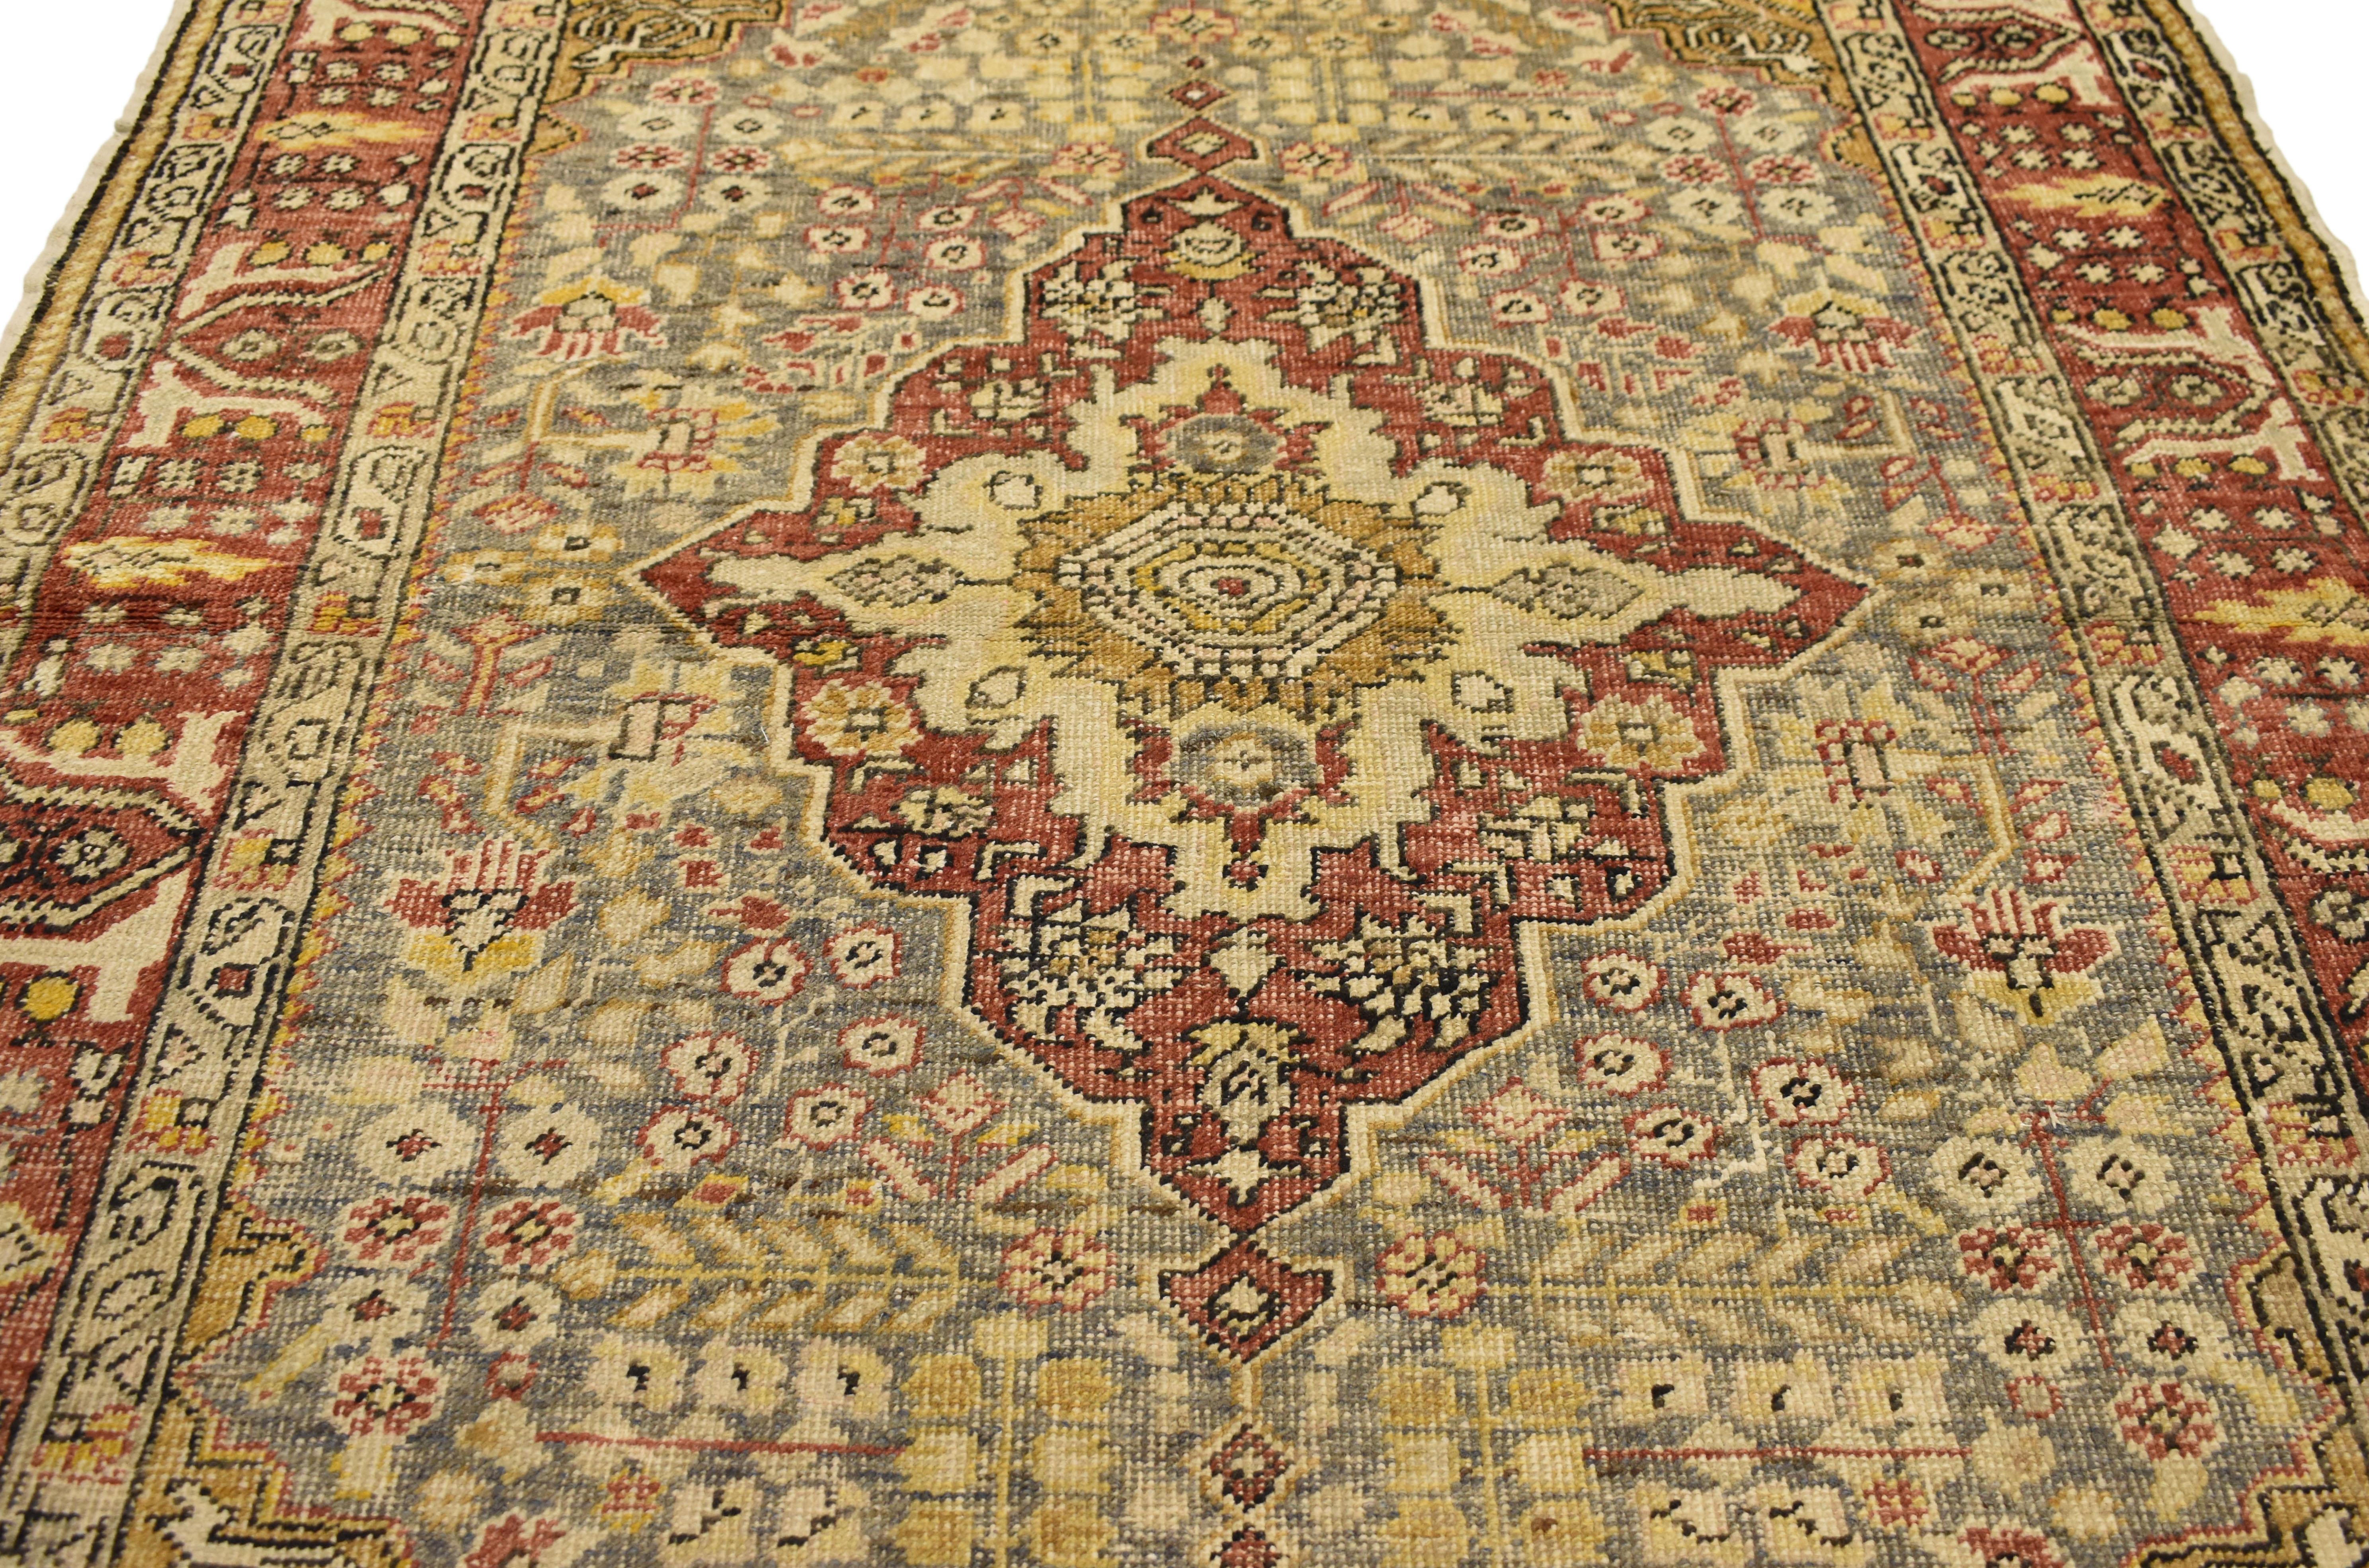 73929 modern rustic style vintage Turkish Sivas rug, entry or foyer rug. This hand-knotted wool vintage Turkish Sivas accent rug features a modern rustic style. Immersed in Anatolian history and time-softened colors, this vintage rustic Sivas rug